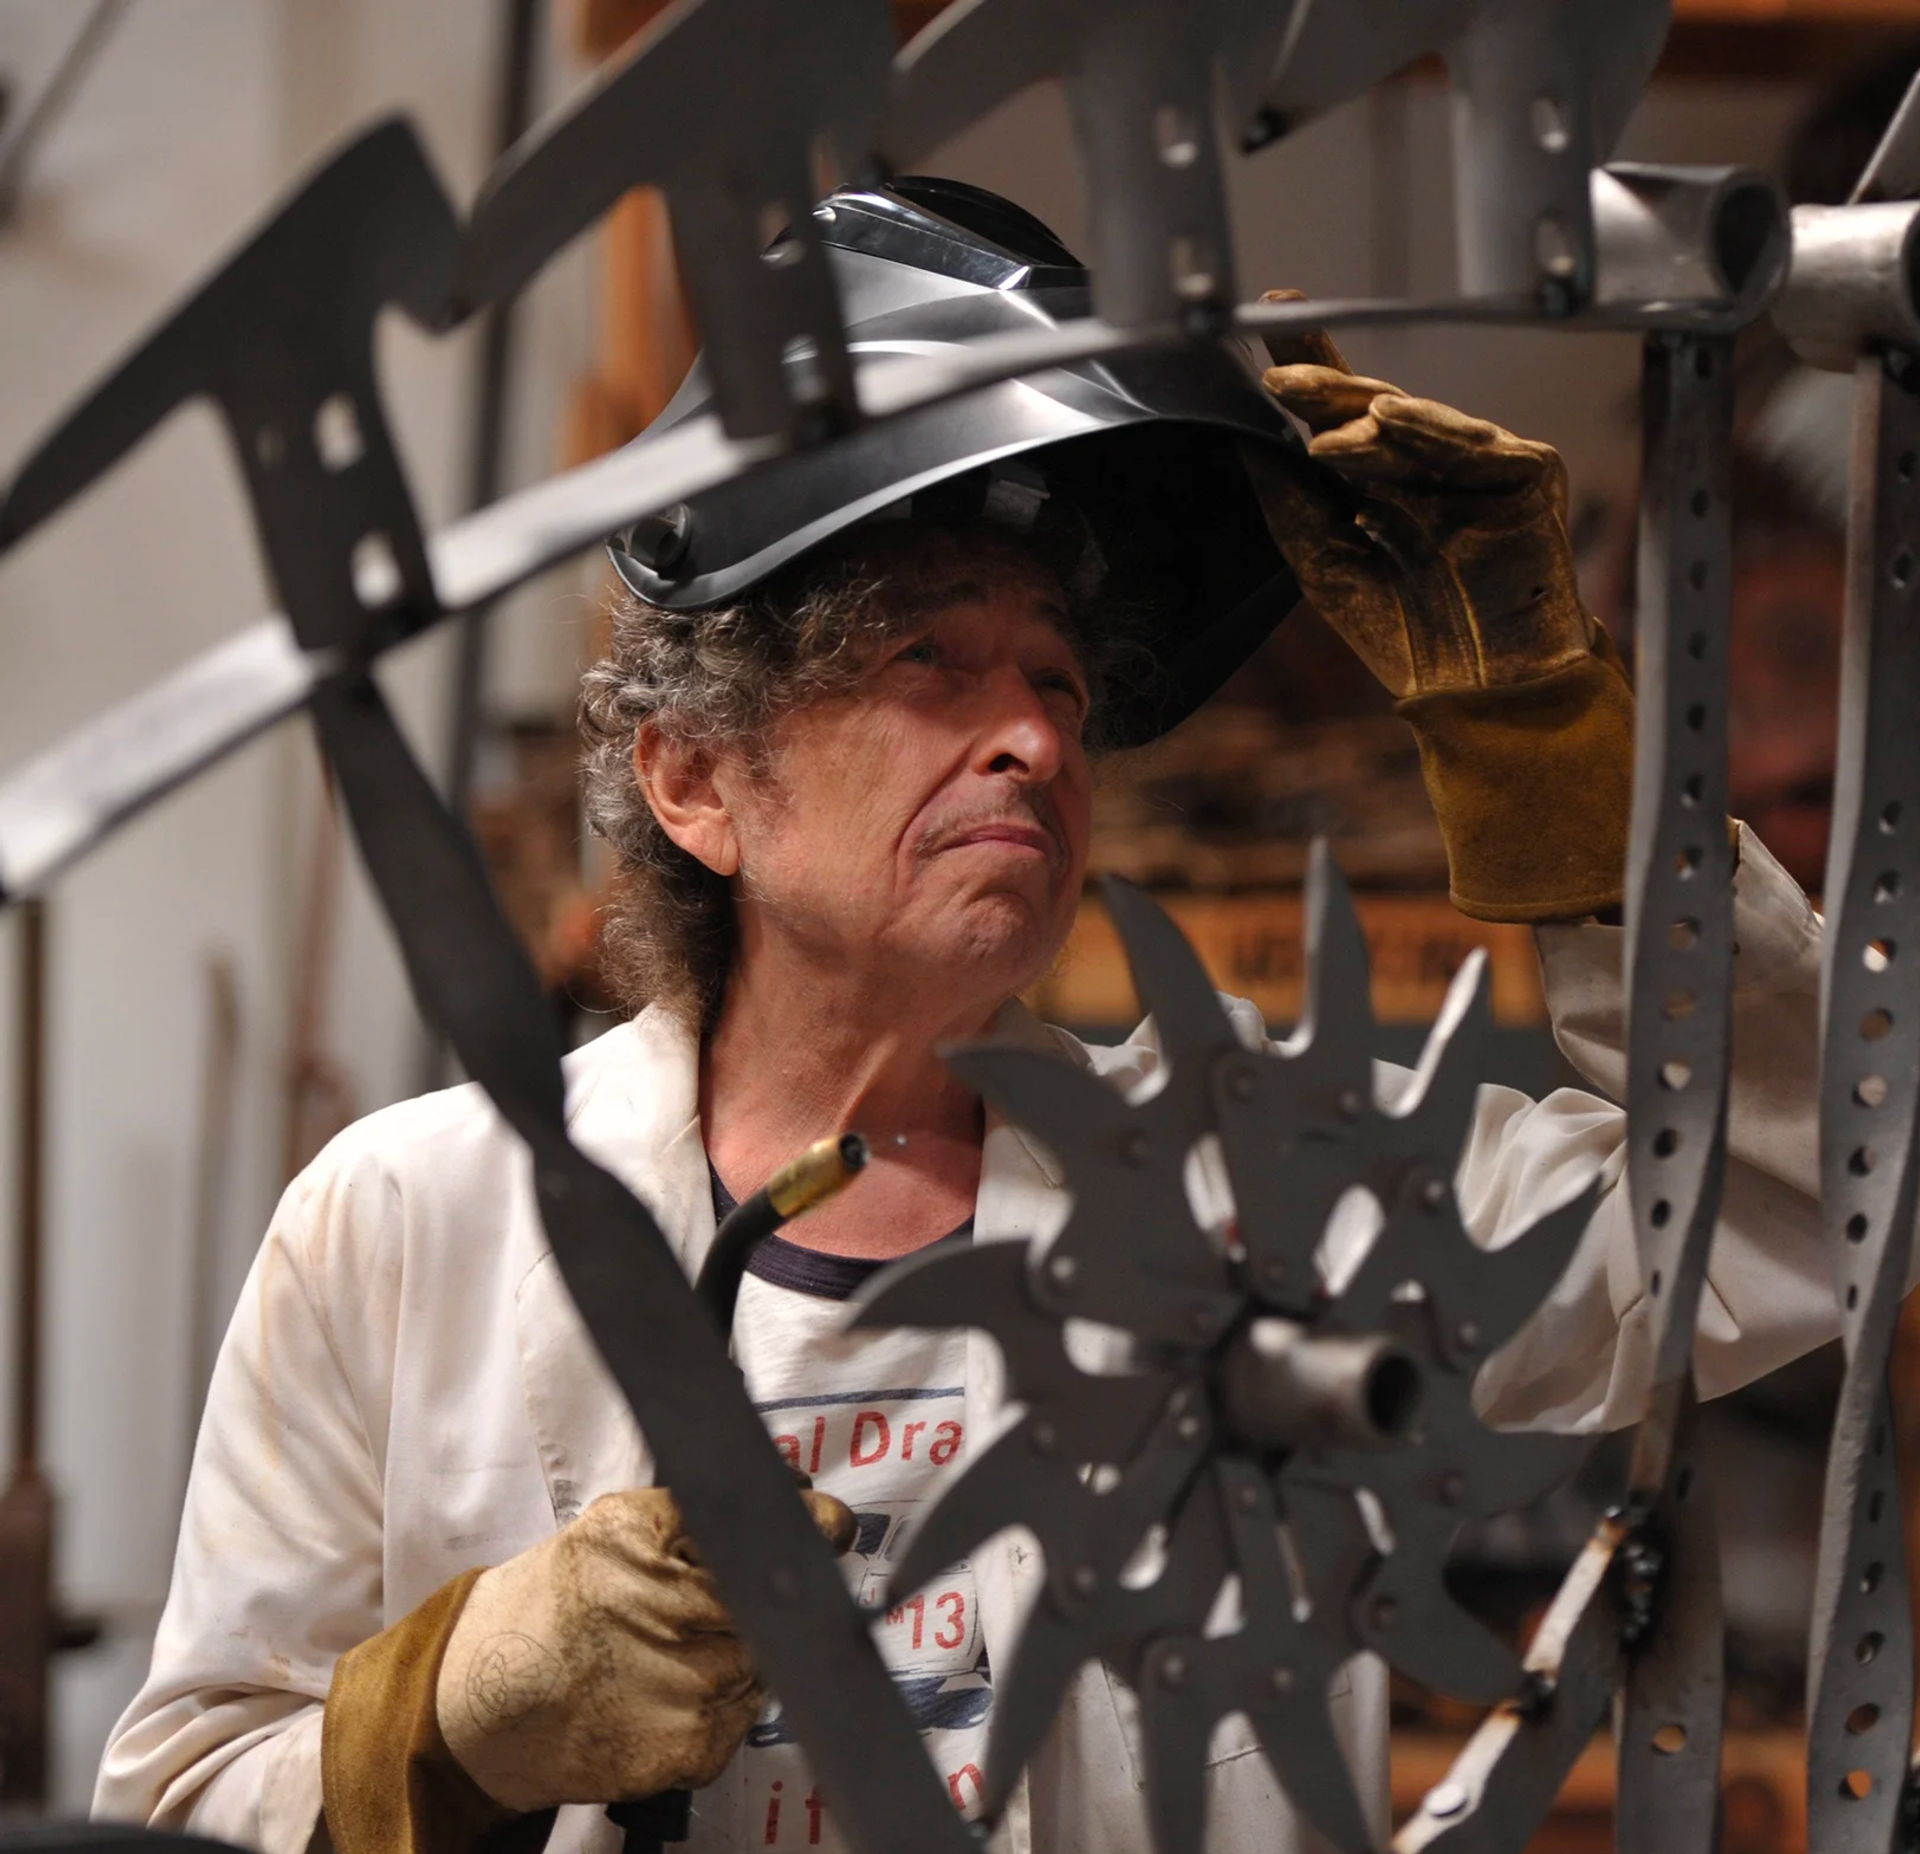 A photographic image of Bob Dyaln wearing yellow gloves and a hardhat working in the studio on a meatl sculpture.